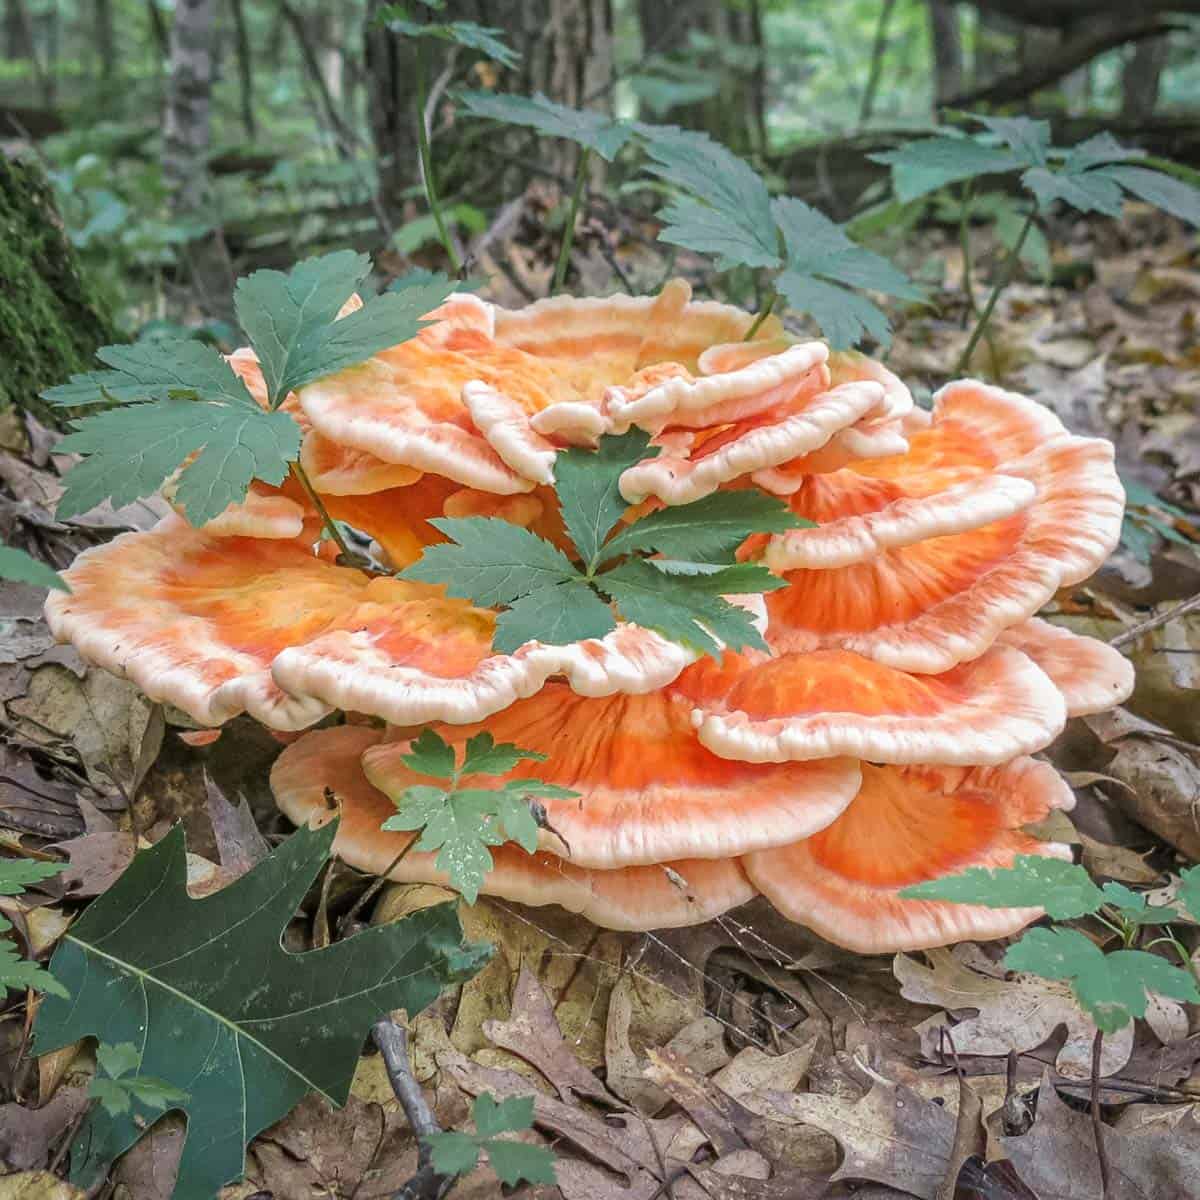 Hunting And Cooking Chicken Of The Woods Mushrooms,Jack O Lantern Faces For Kids